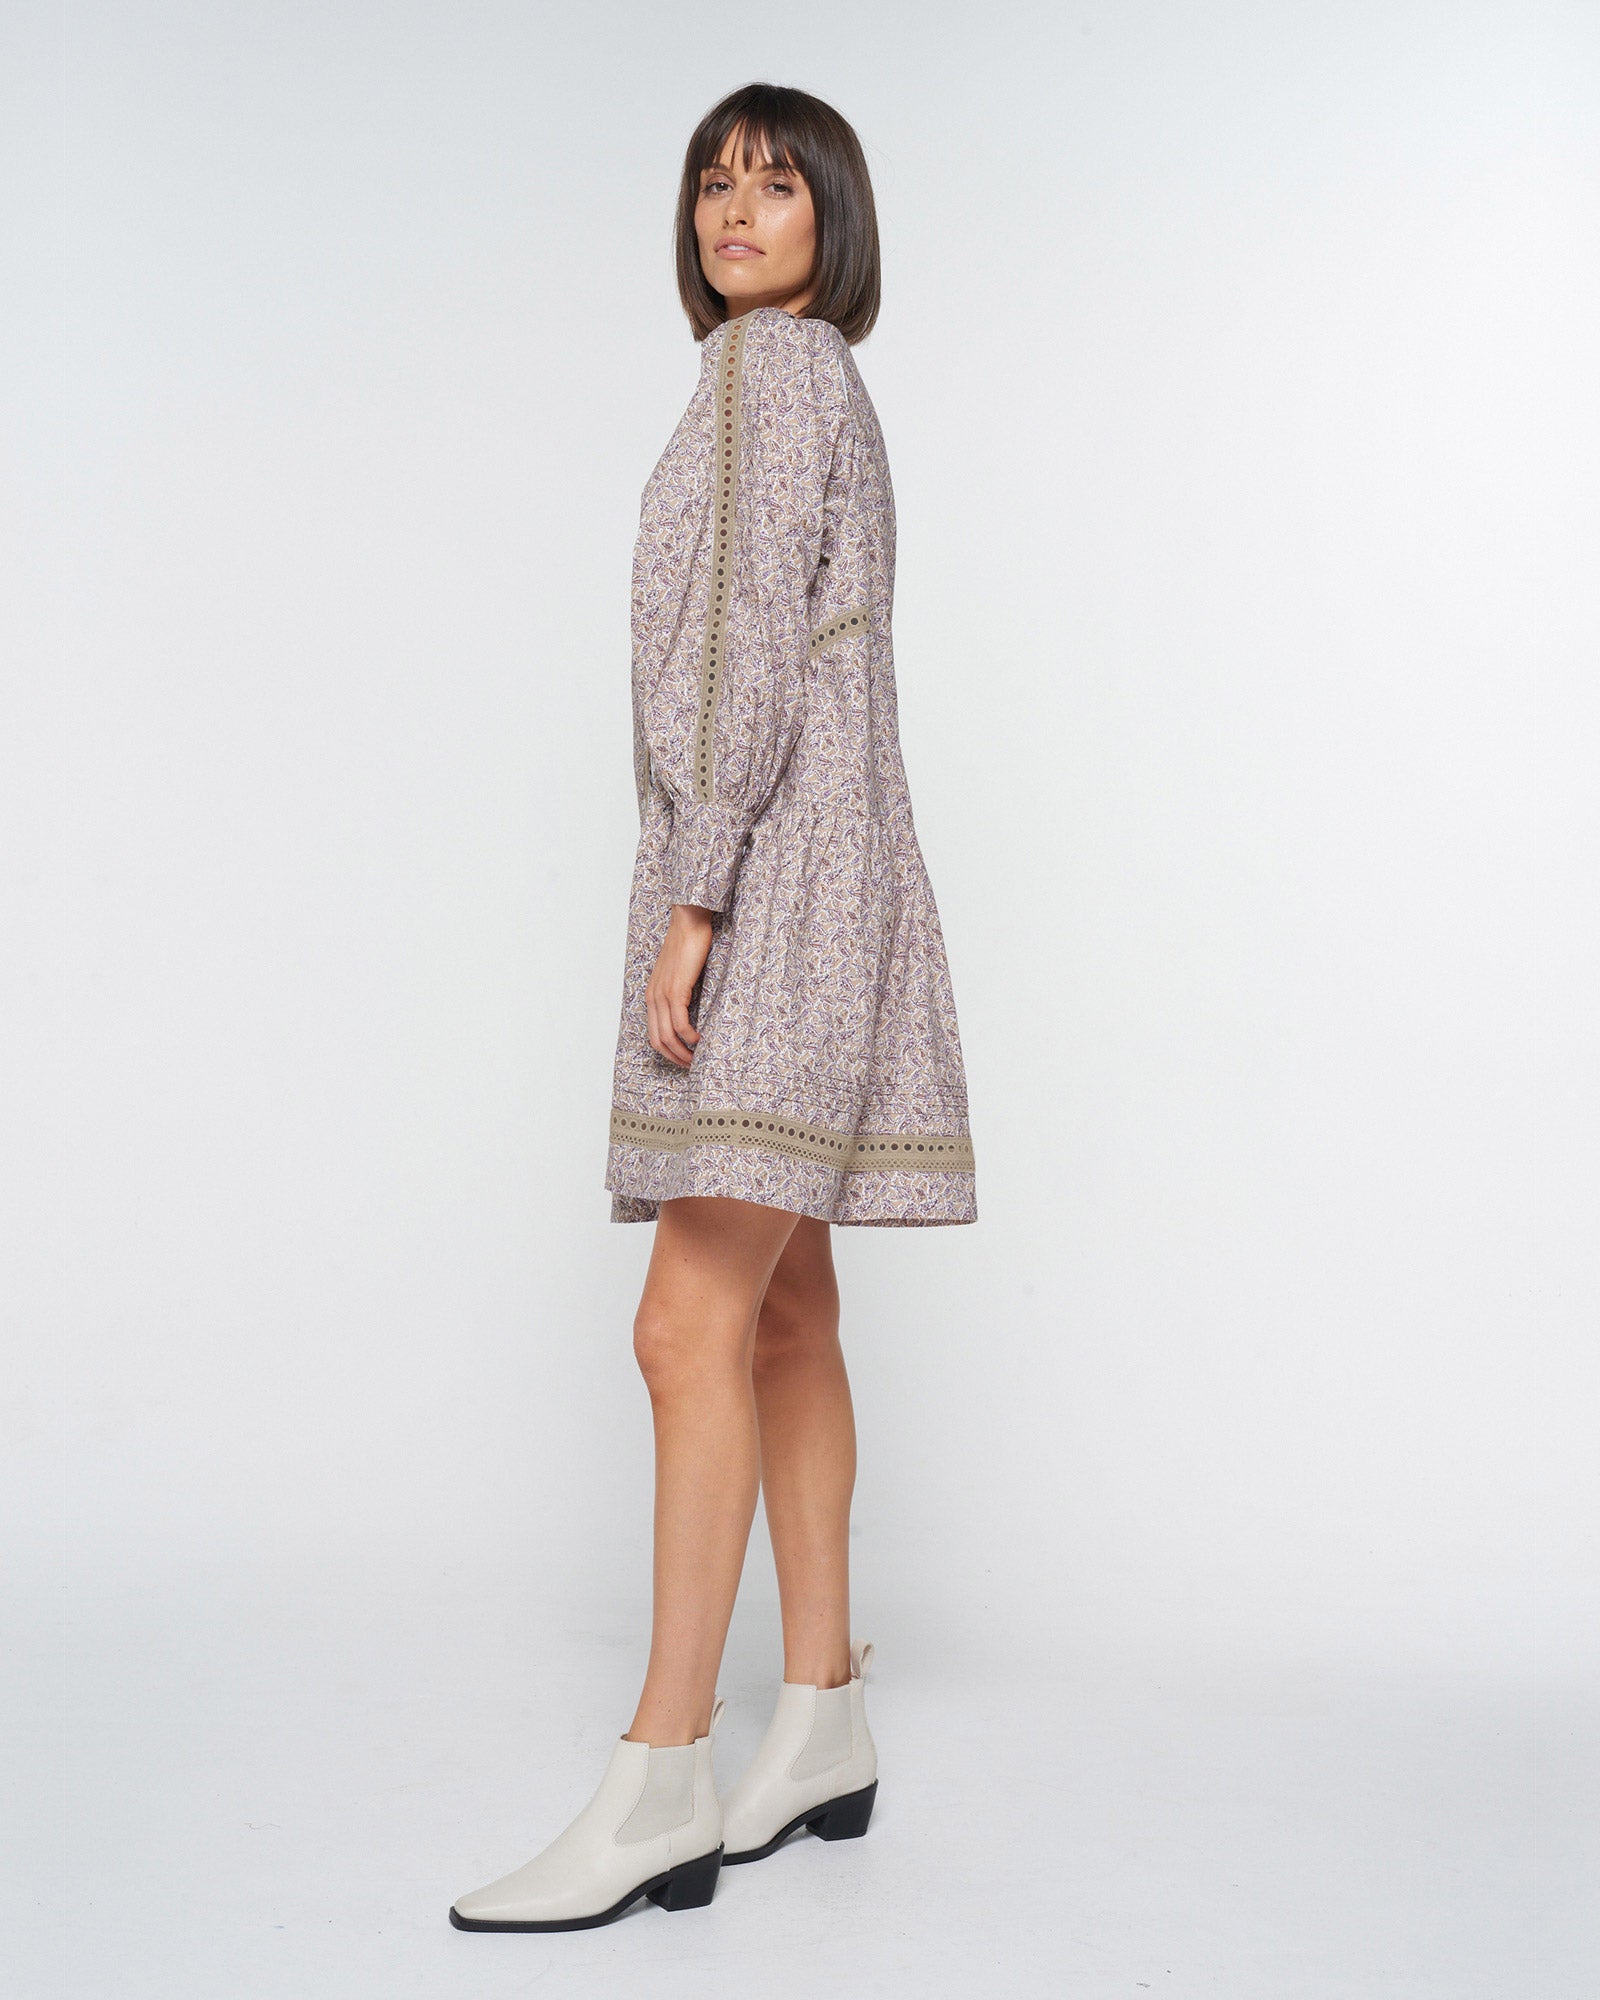 douse dress - biscuit paisley